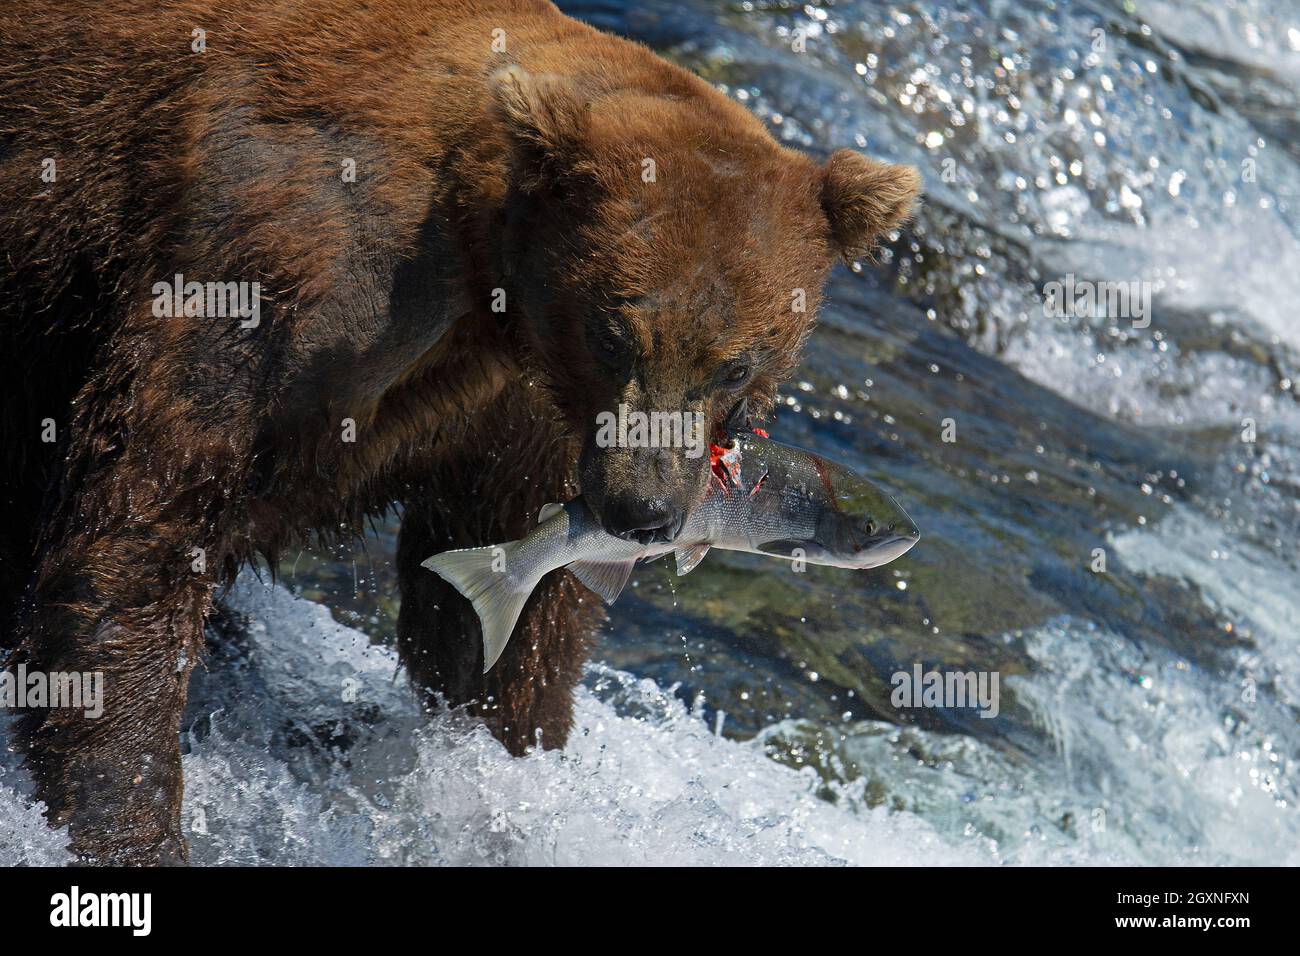 Brown bear, Ursus arctos, with sockeye salmon in his mouth at the top of Brooks Falls, Katmai National Park and Preserve, Alaska, USA Stock Photo